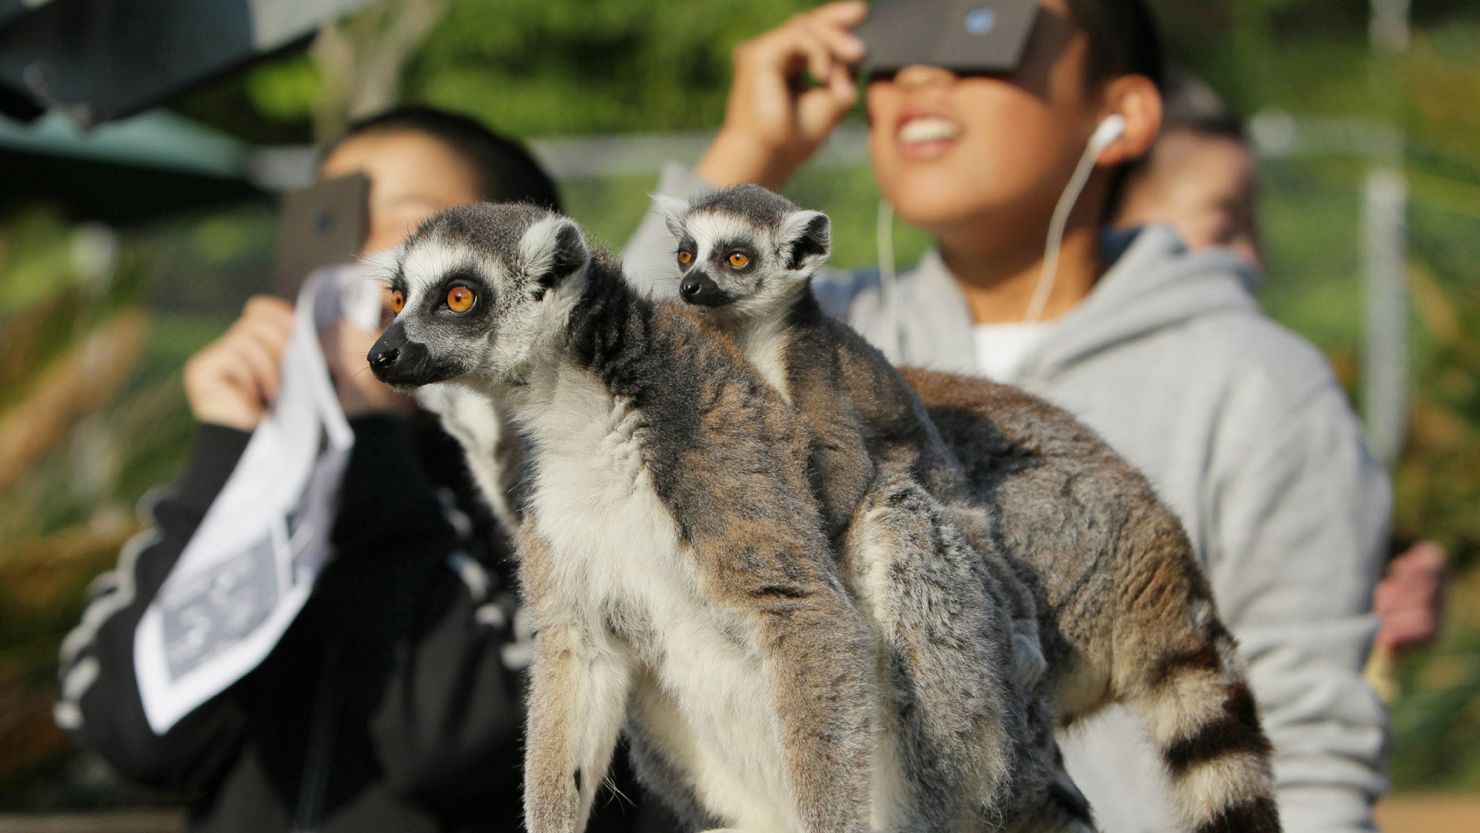 During a solar eclipse in May 2012, ring-tailed lemurs at the Japan Monkey Center in Inuyama skipped breakfast and clambered among trees and poles.